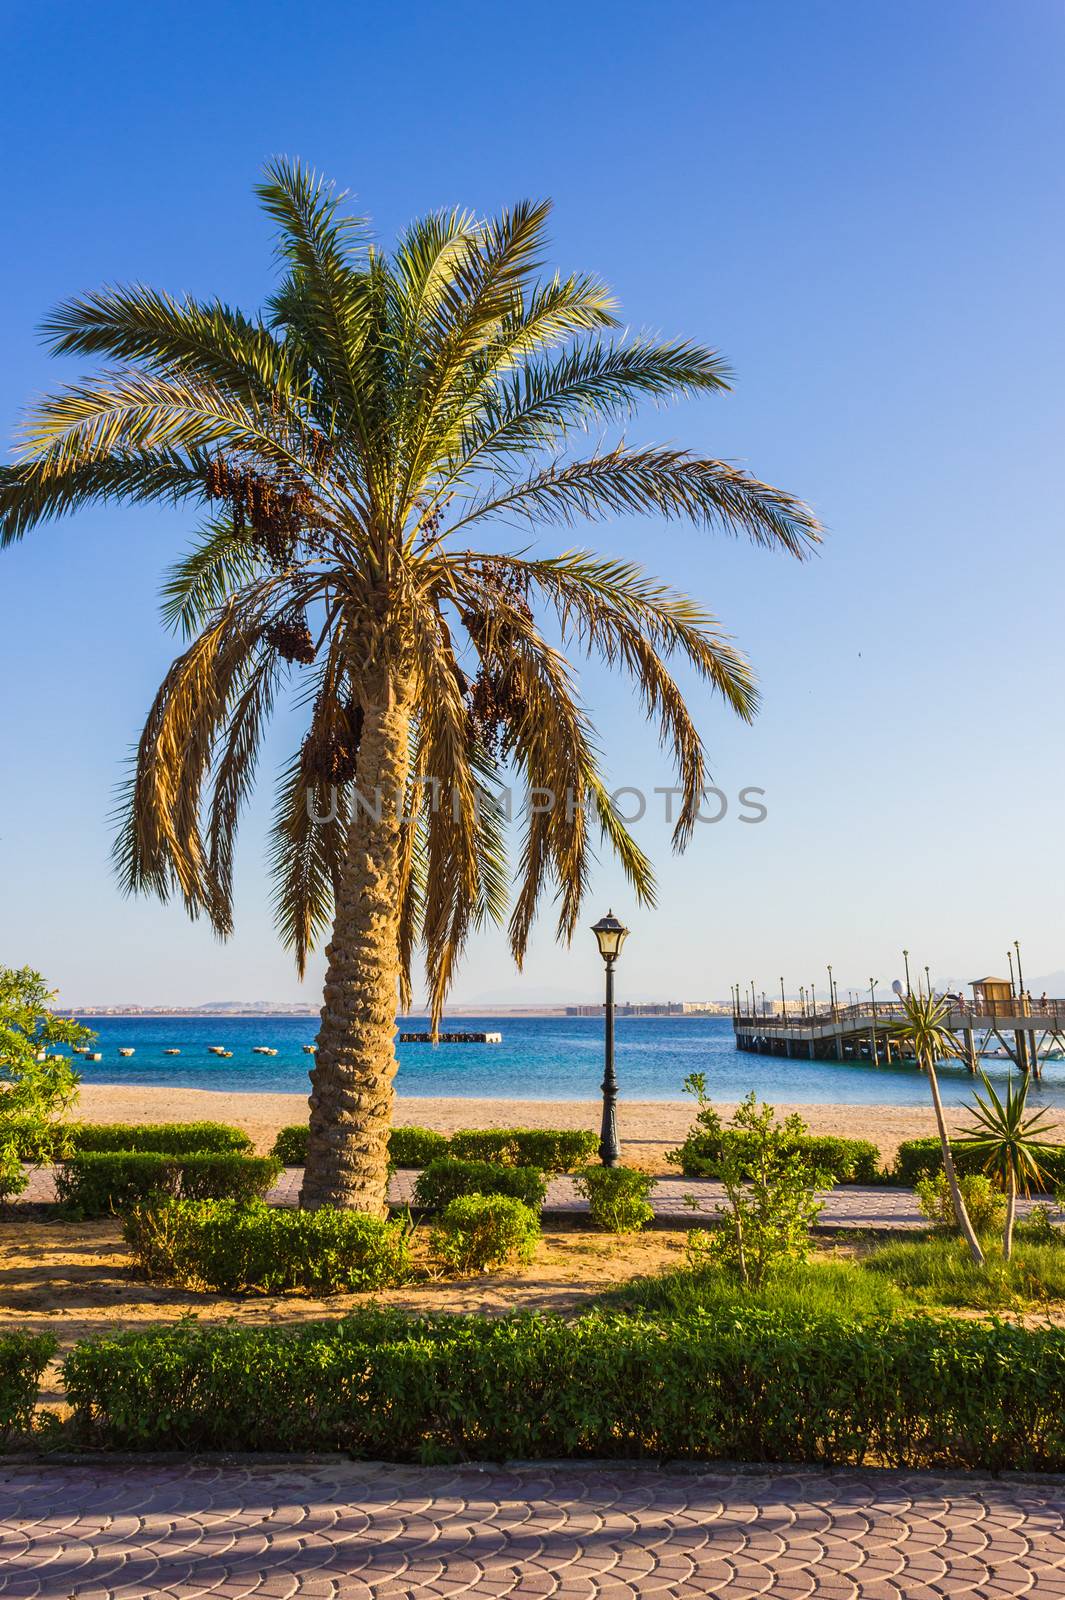 Palm trees on the beach in Egypt on the Red Sea